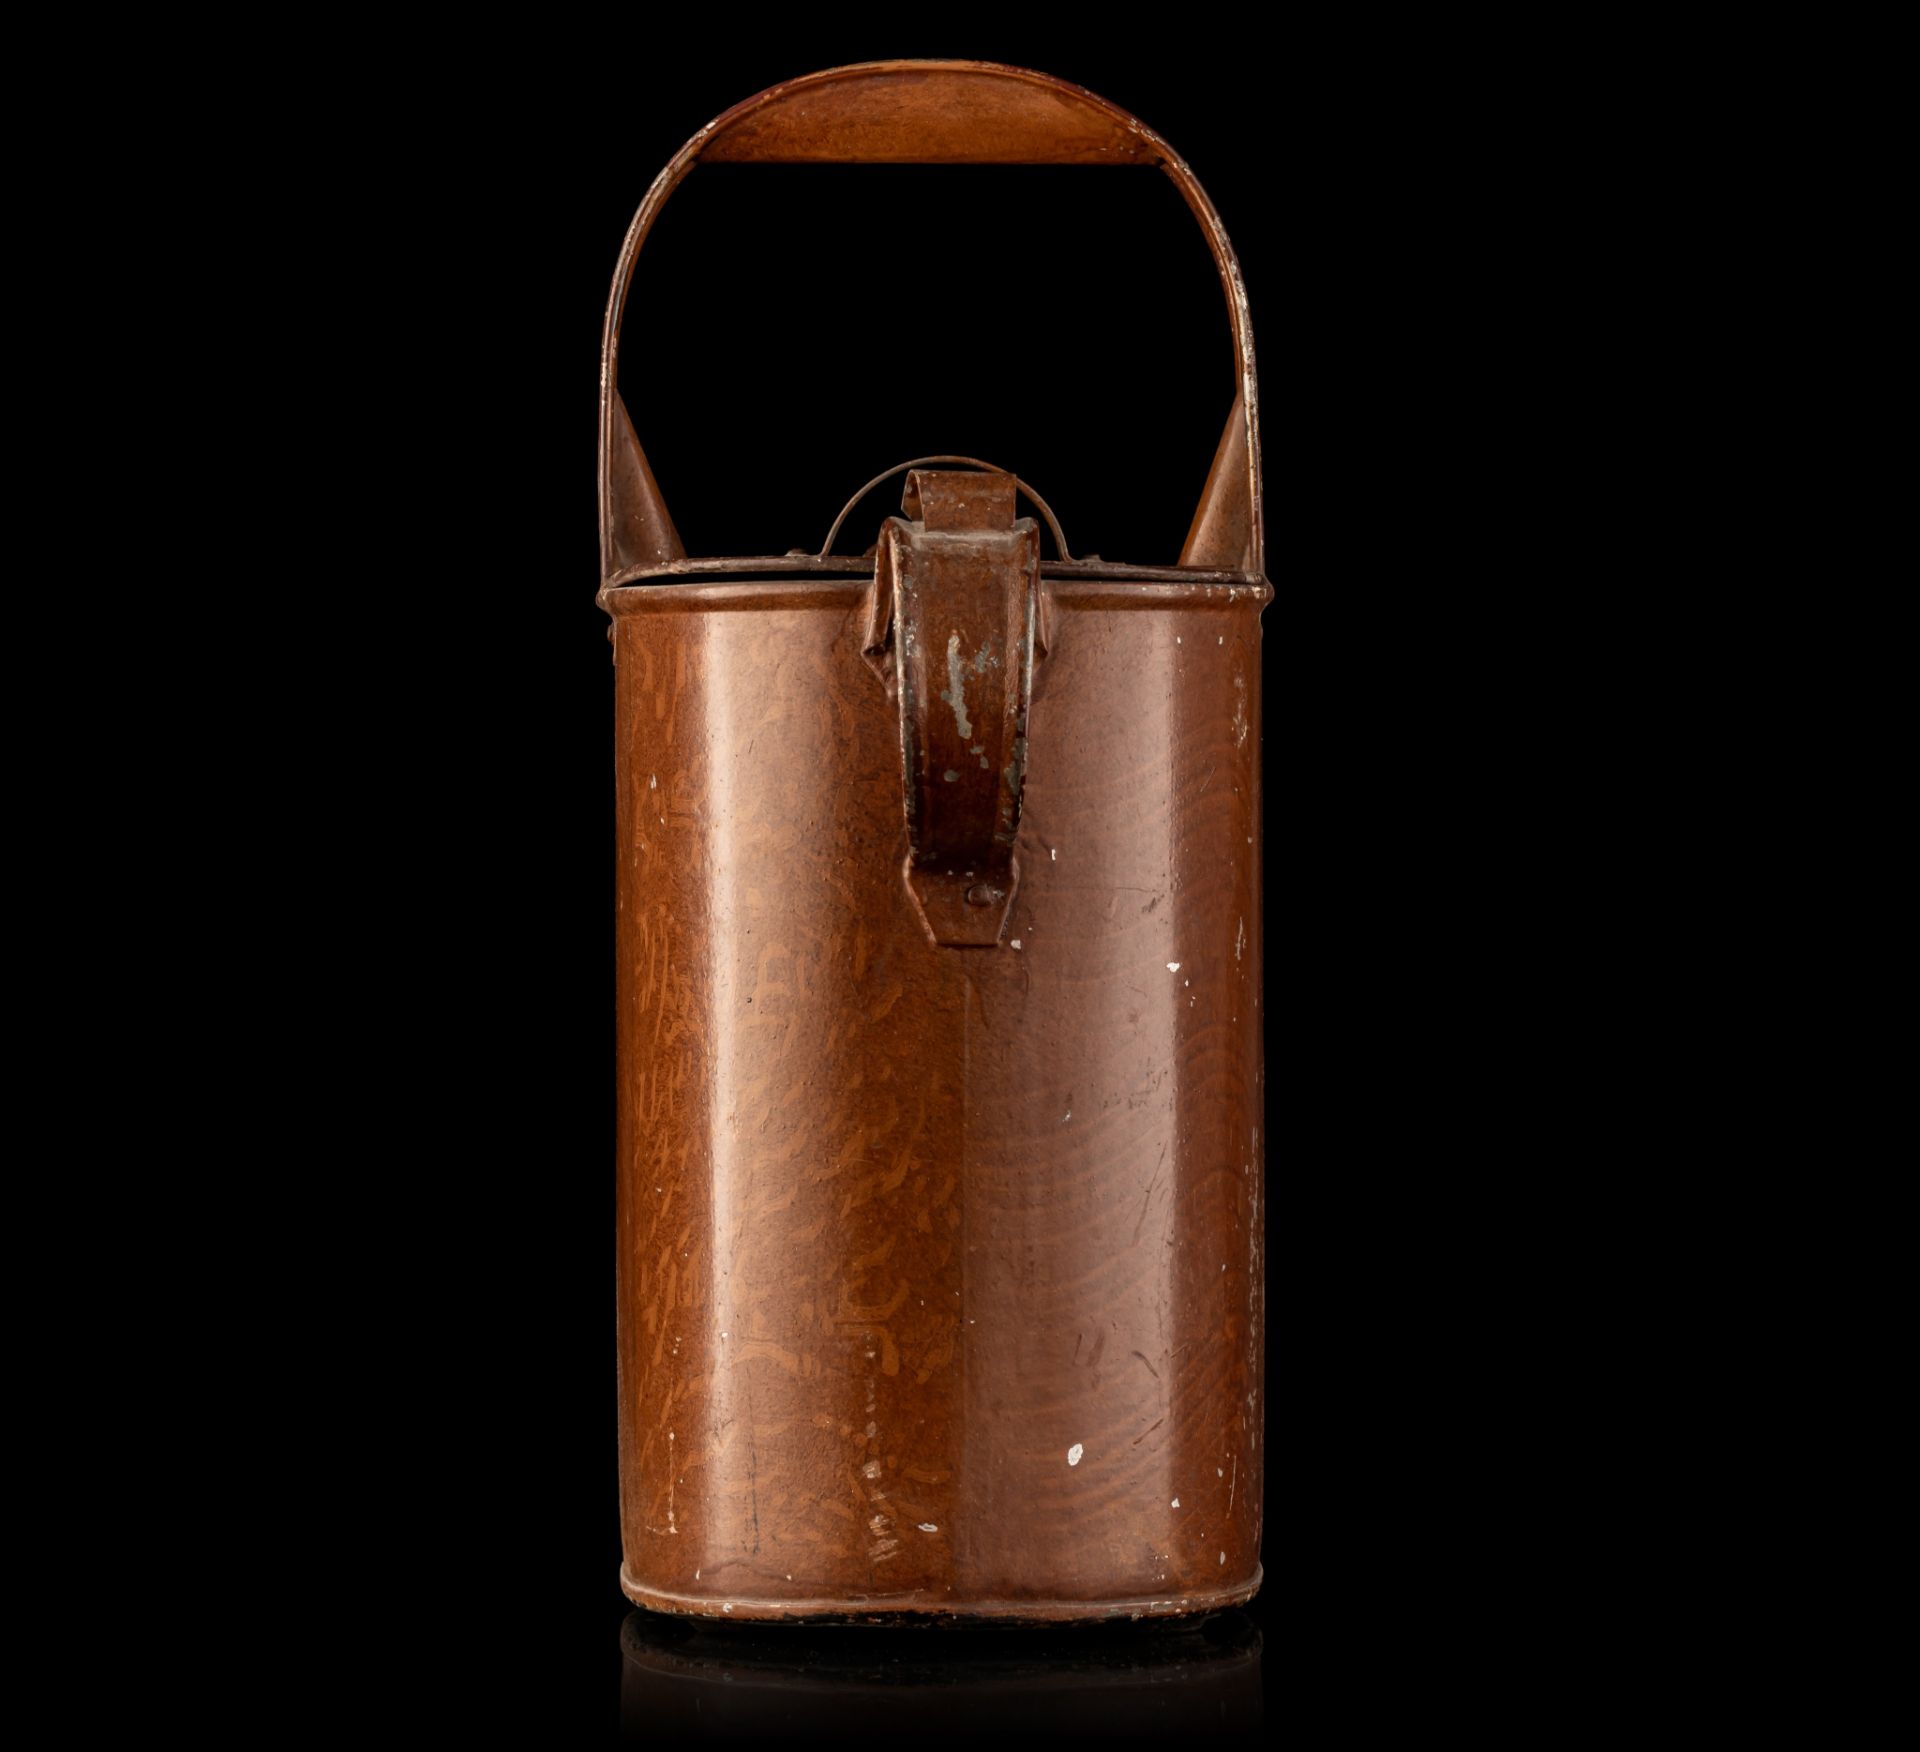 A Japanned oak polished tin water can, marked Richard Perry, Son & Co, Wolverhampton, ca 1882-1885, - Image 5 of 9